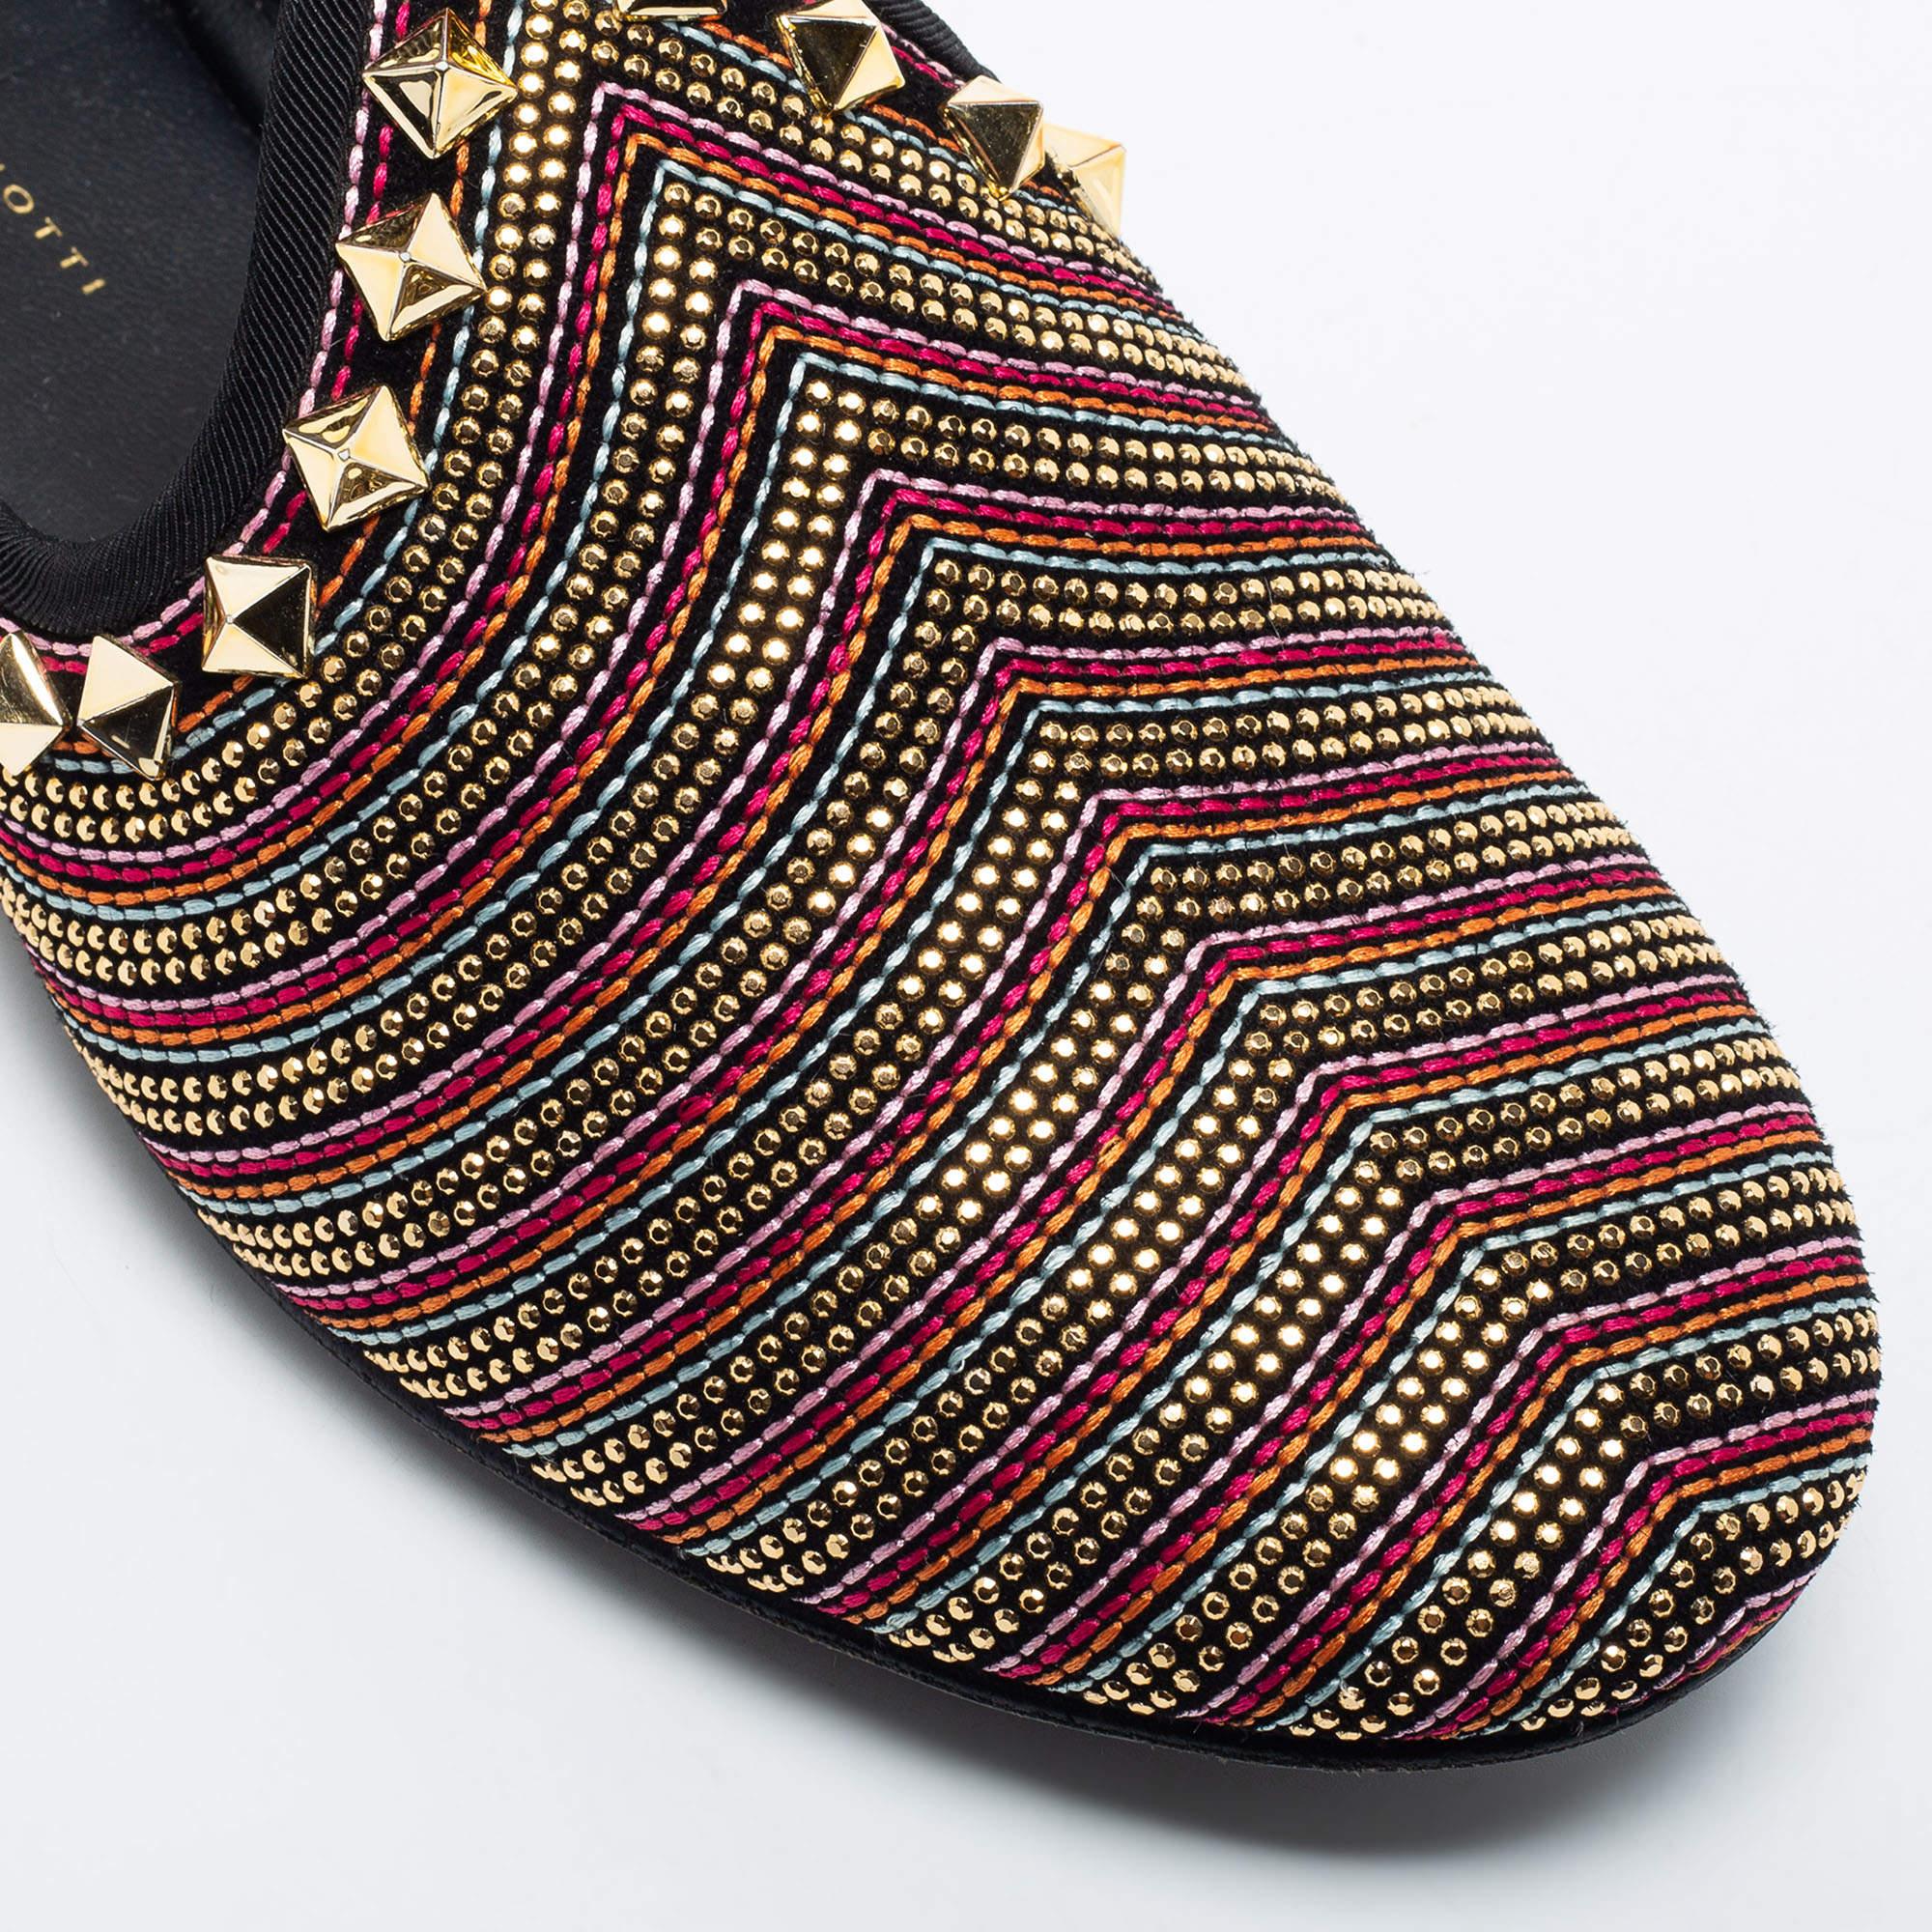 Giuseppe Zanotti Multicolor Embellished Suede Smoking Slippers Size 41 For Sale 1